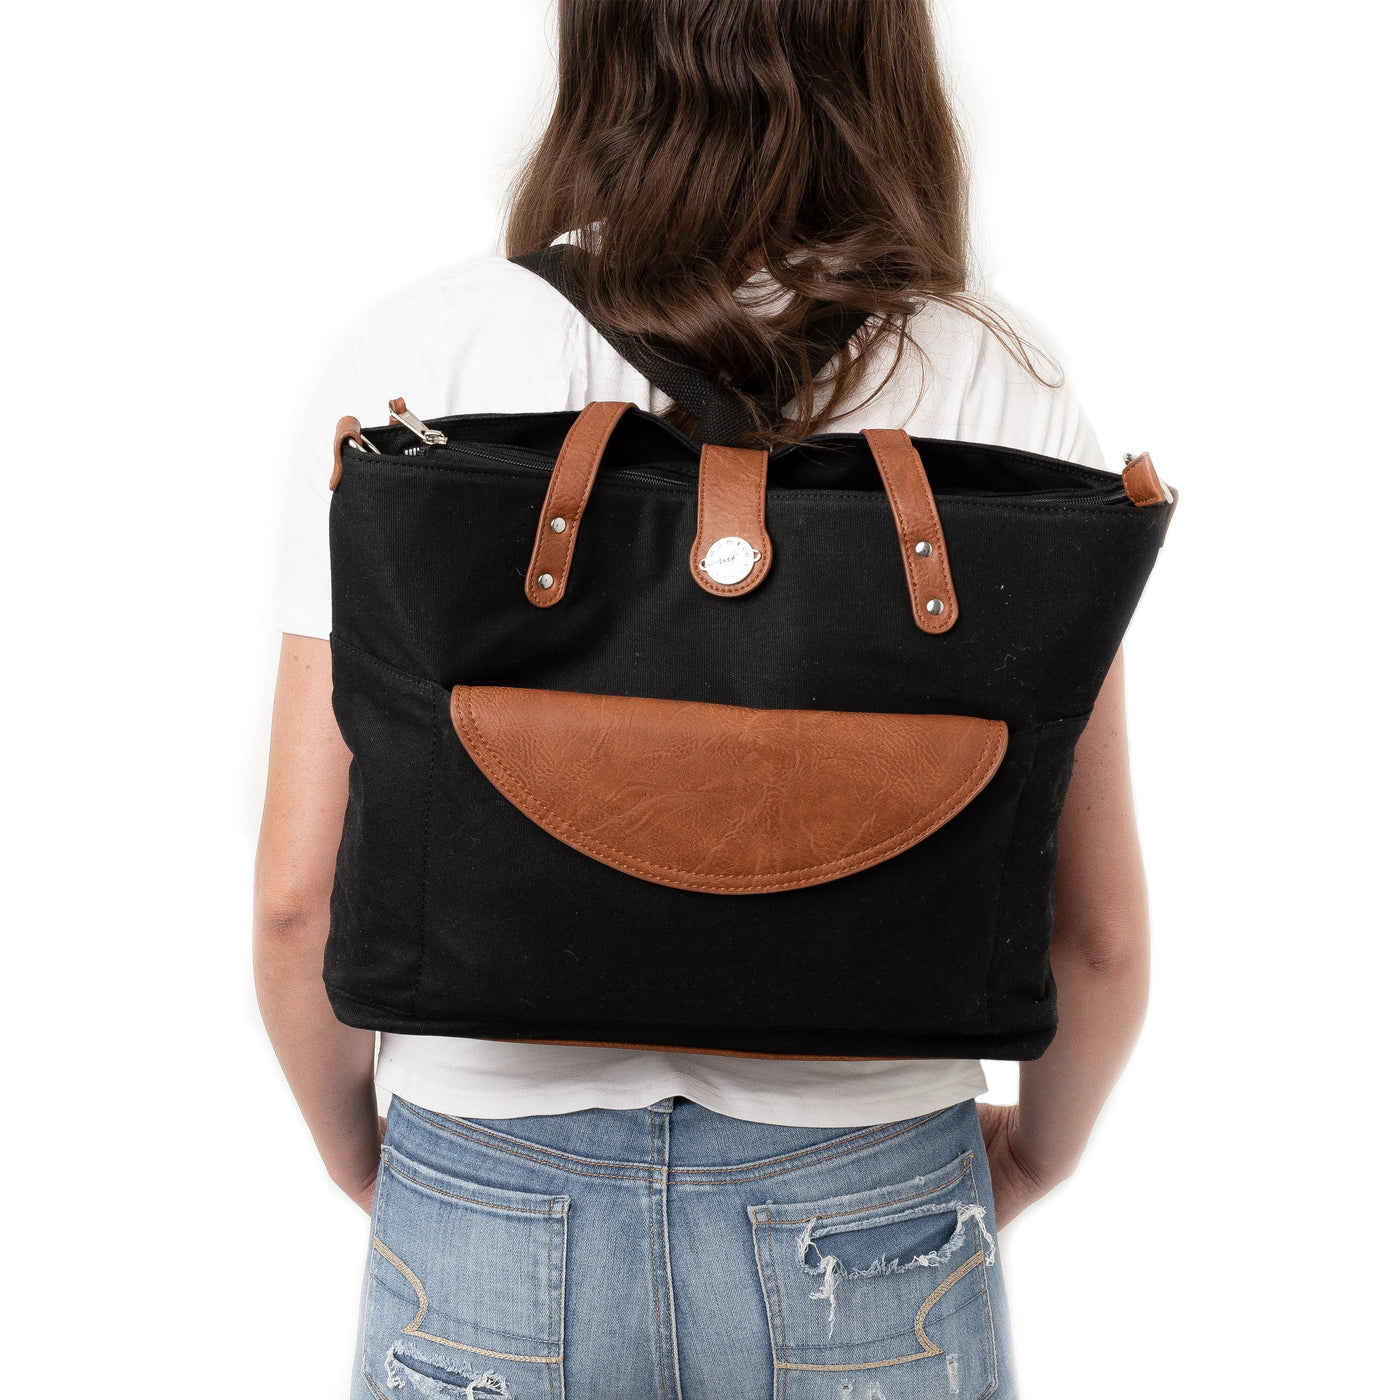 Mom in jeans and a white t-shirt standing backwards wearing a black waxed canvas backpack with brown vegan leather accents, all on a white background.